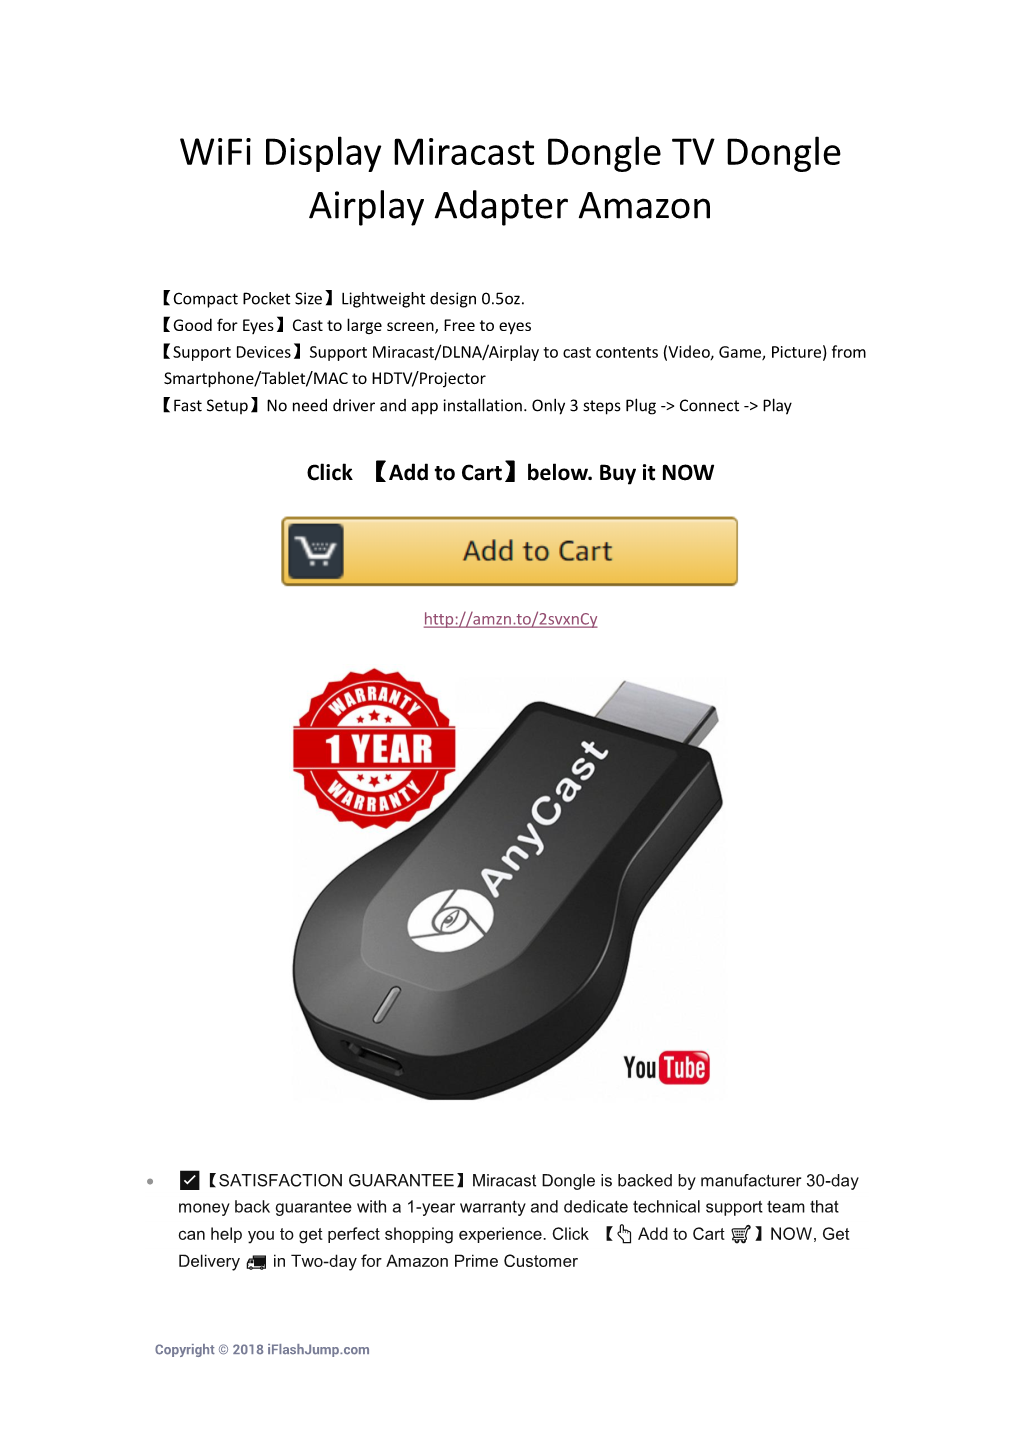 Wifi Display Miracast Dongle TV Dongle Airplay Adapter Amazon